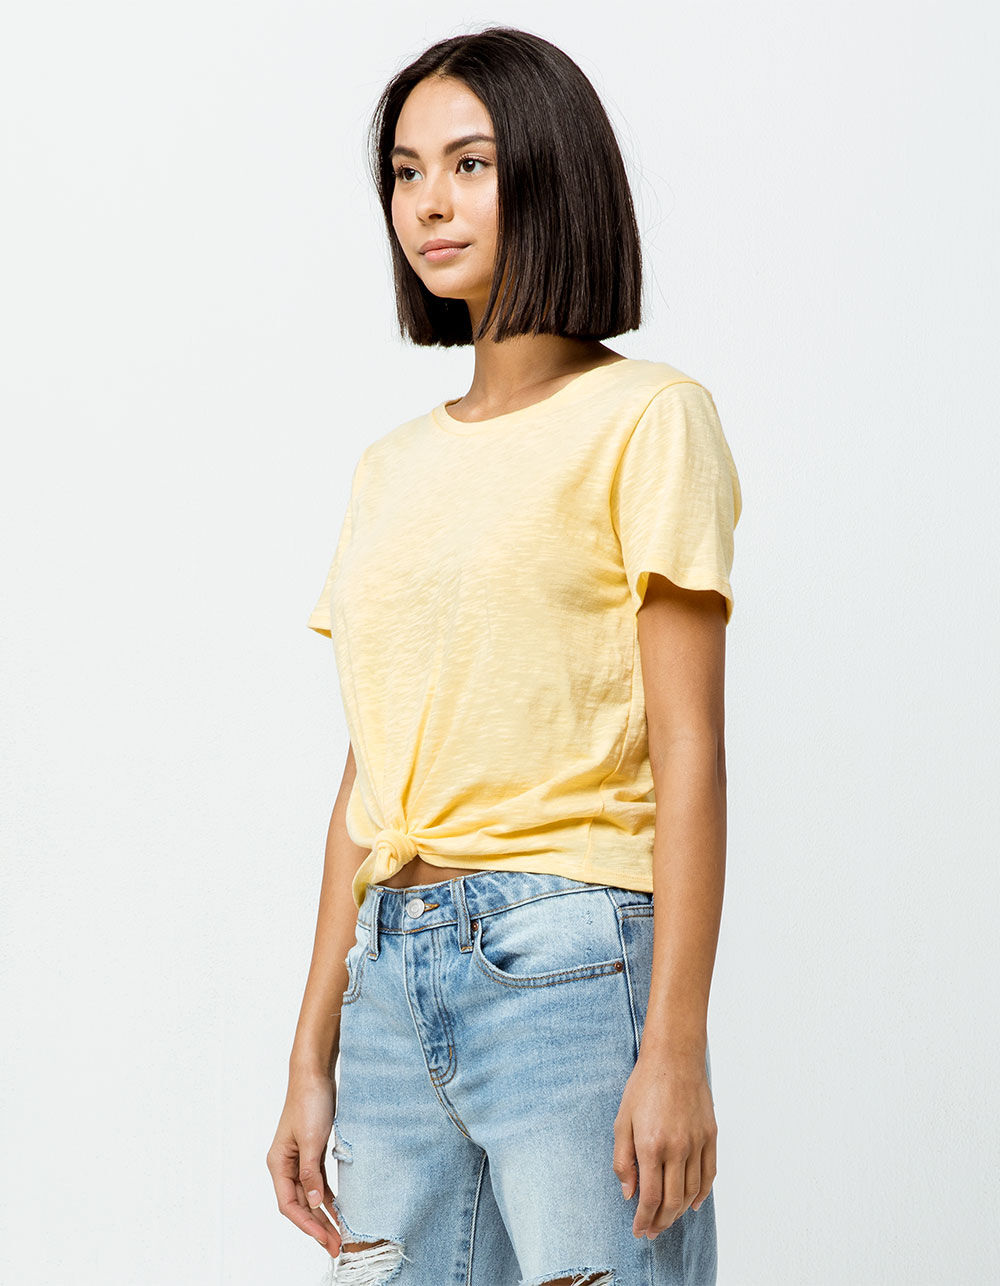 SKY AND SPARROW Solid Knot Front Yellow Womens Tee - YELLOW | Tillys